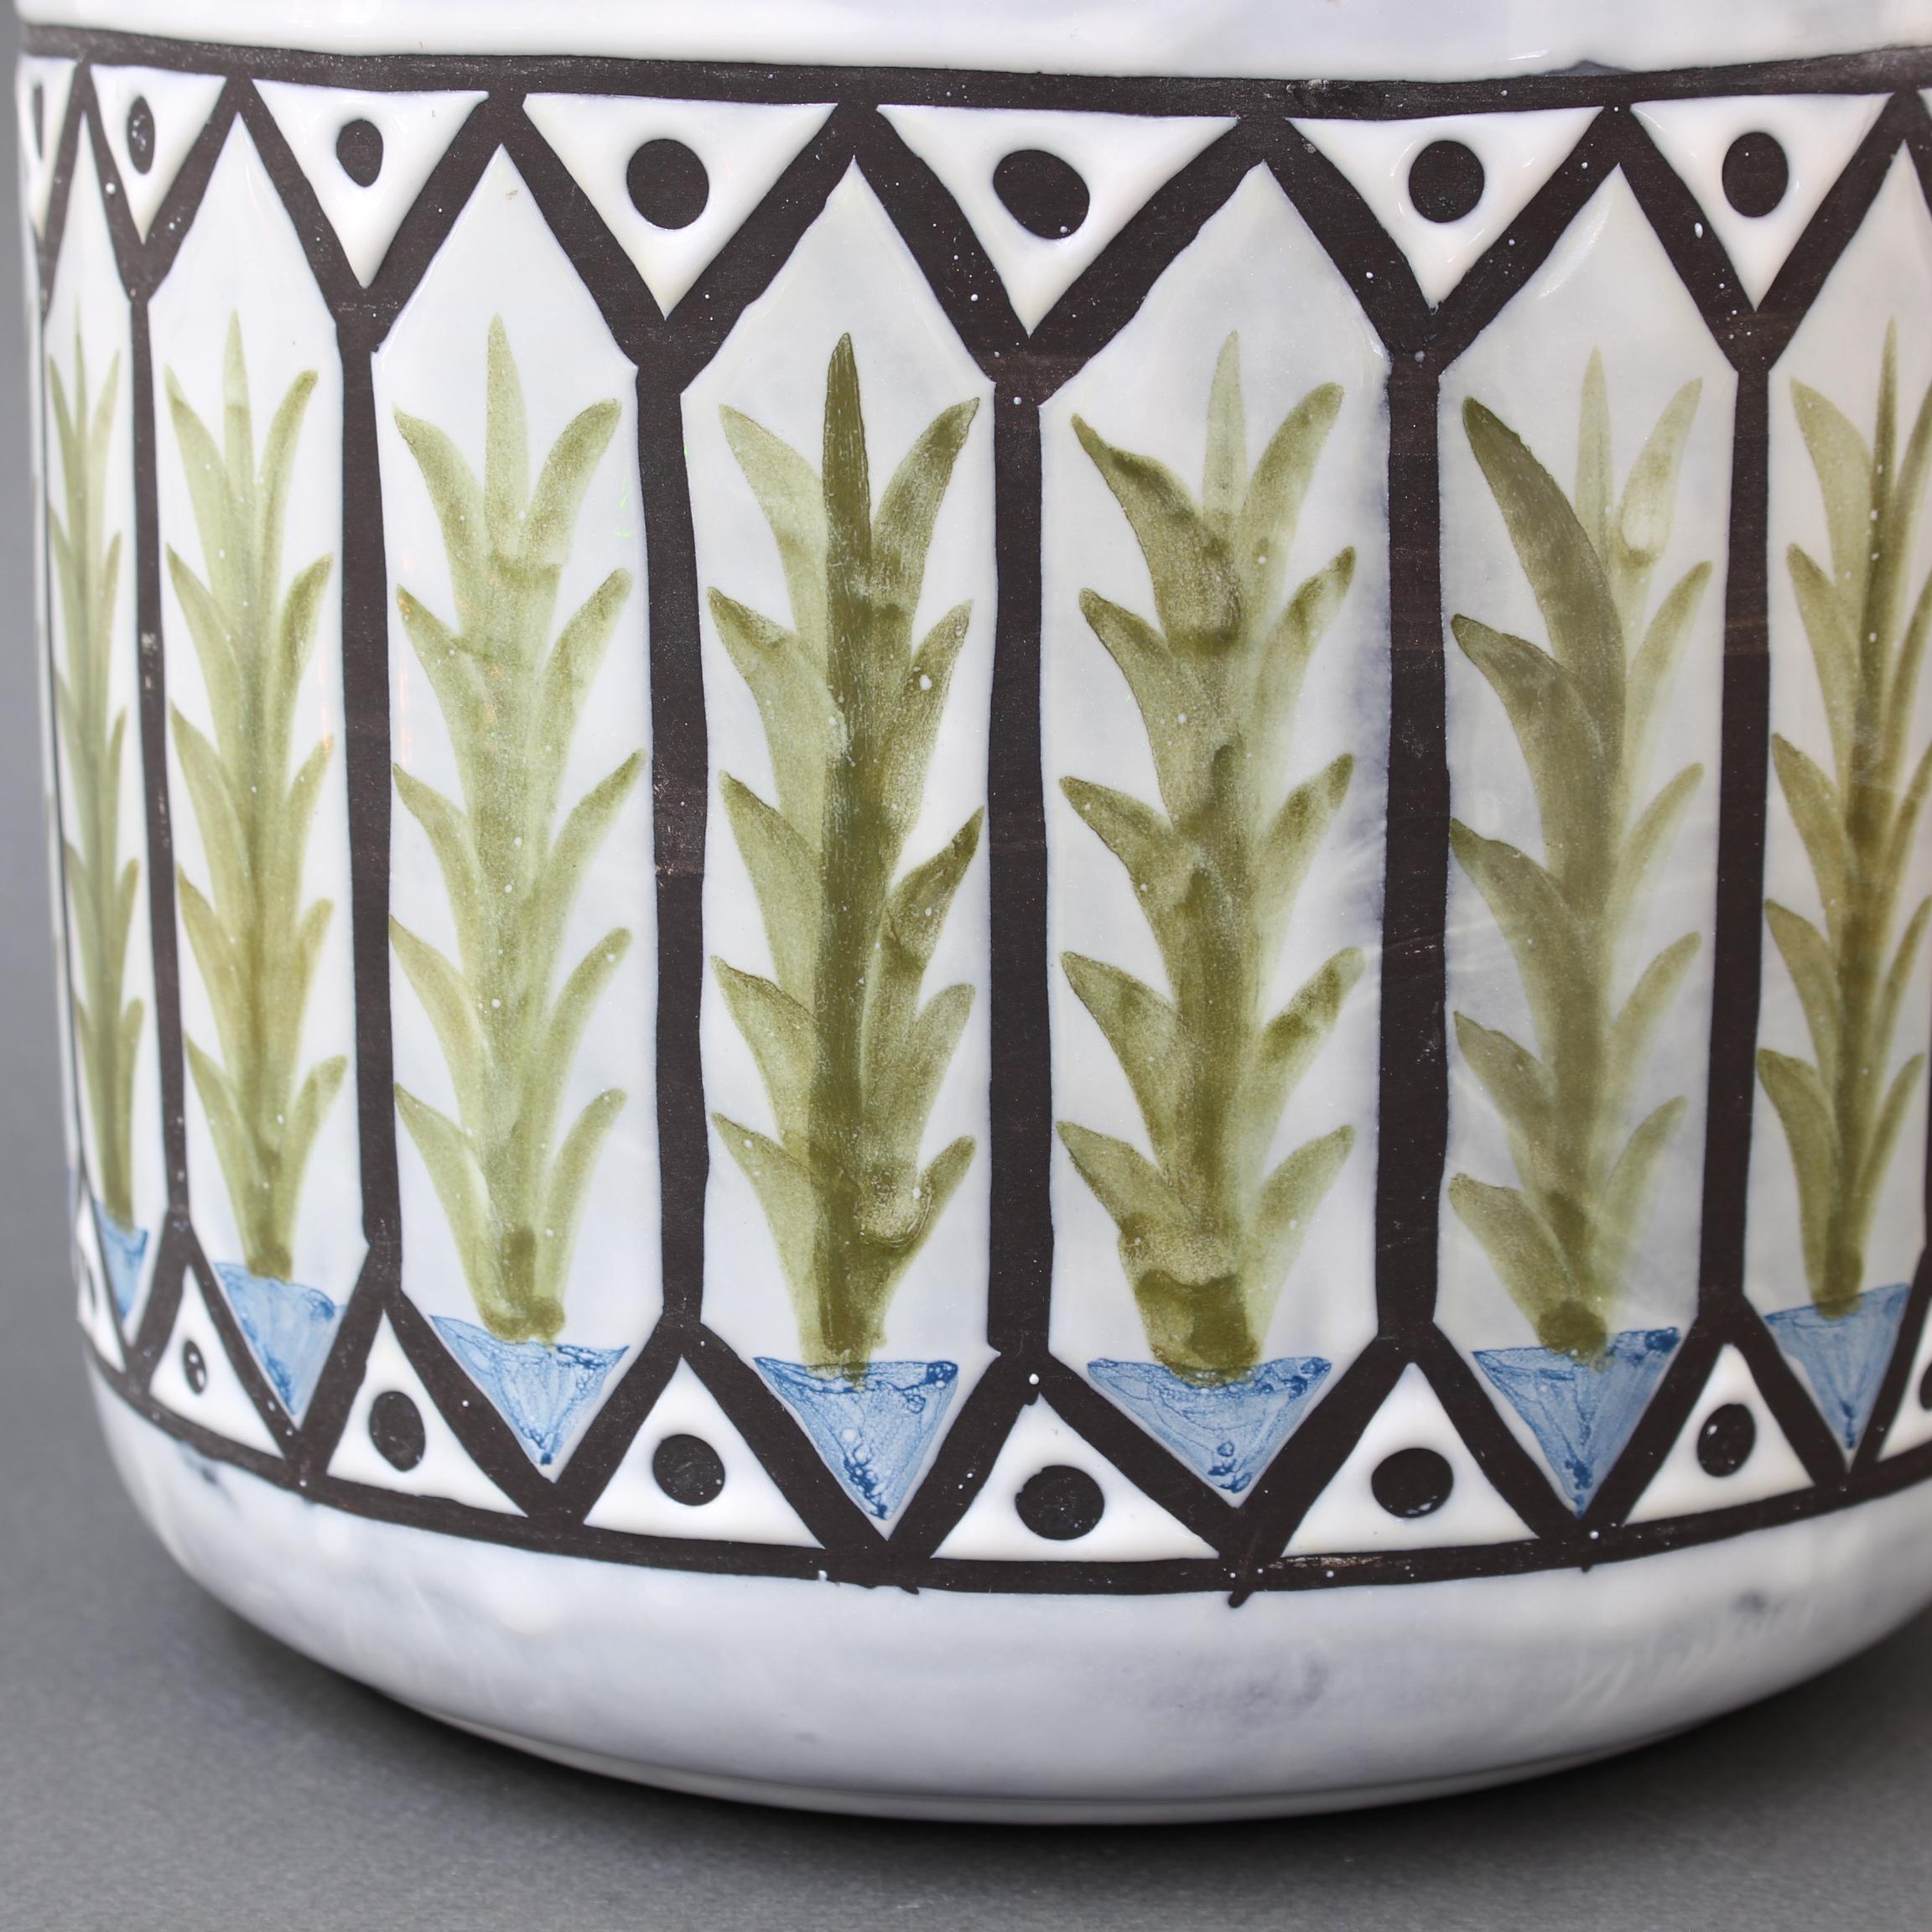 Vintage French Ceramic Cachepot by Roger Capron, 'circa 1970s' For Sale 6